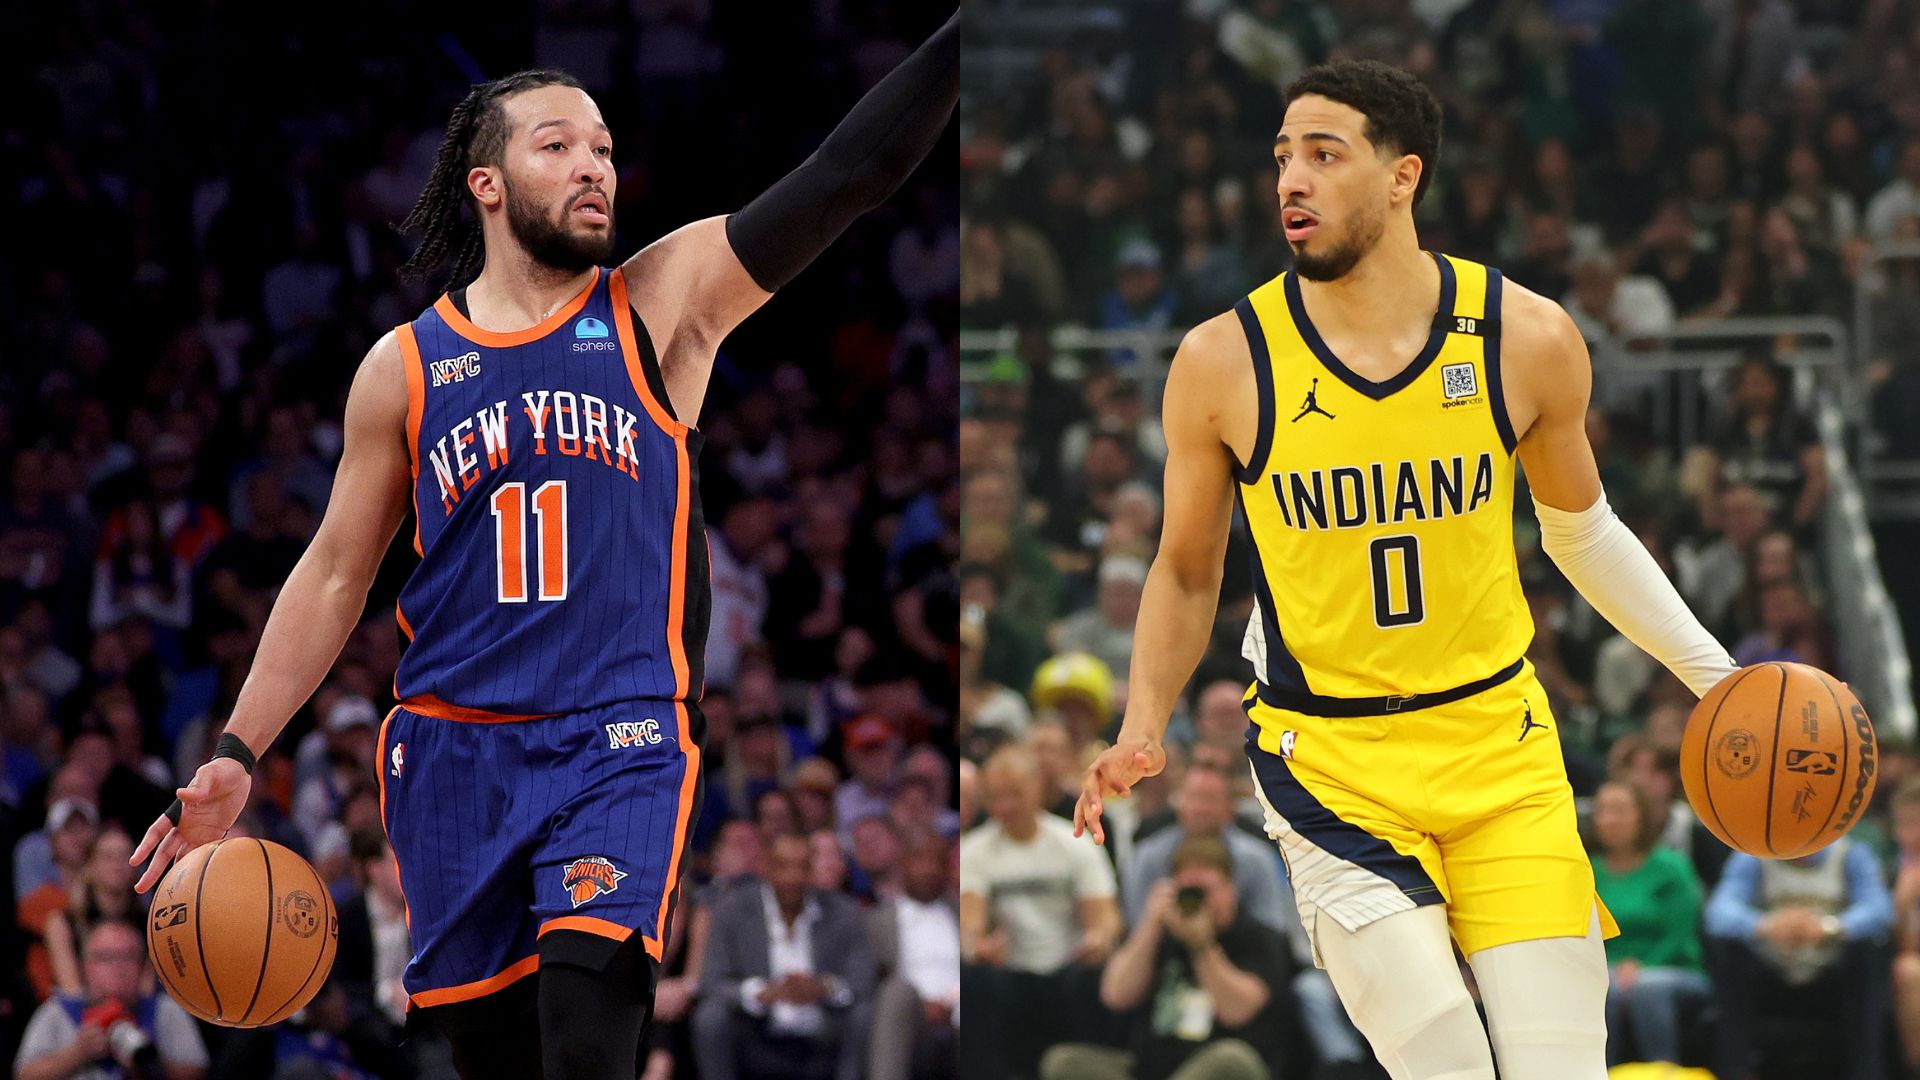 Indiana Pacers vs. New York Knicks | NBA Playoffs